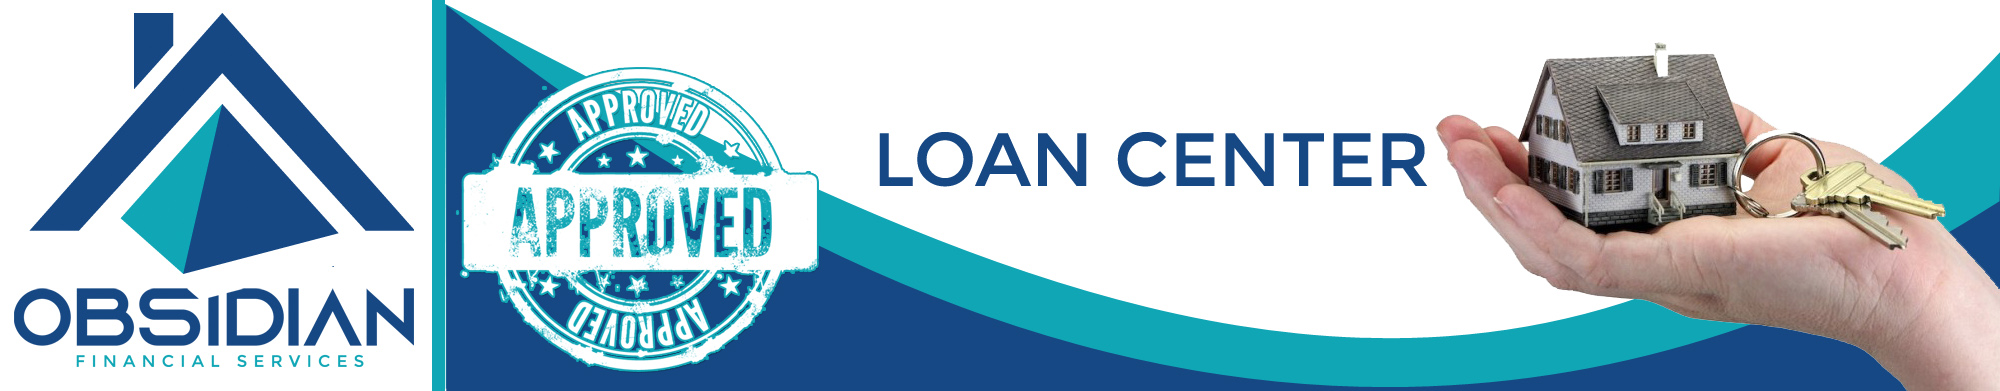 Understanding Your Loan Options - Calculator Page